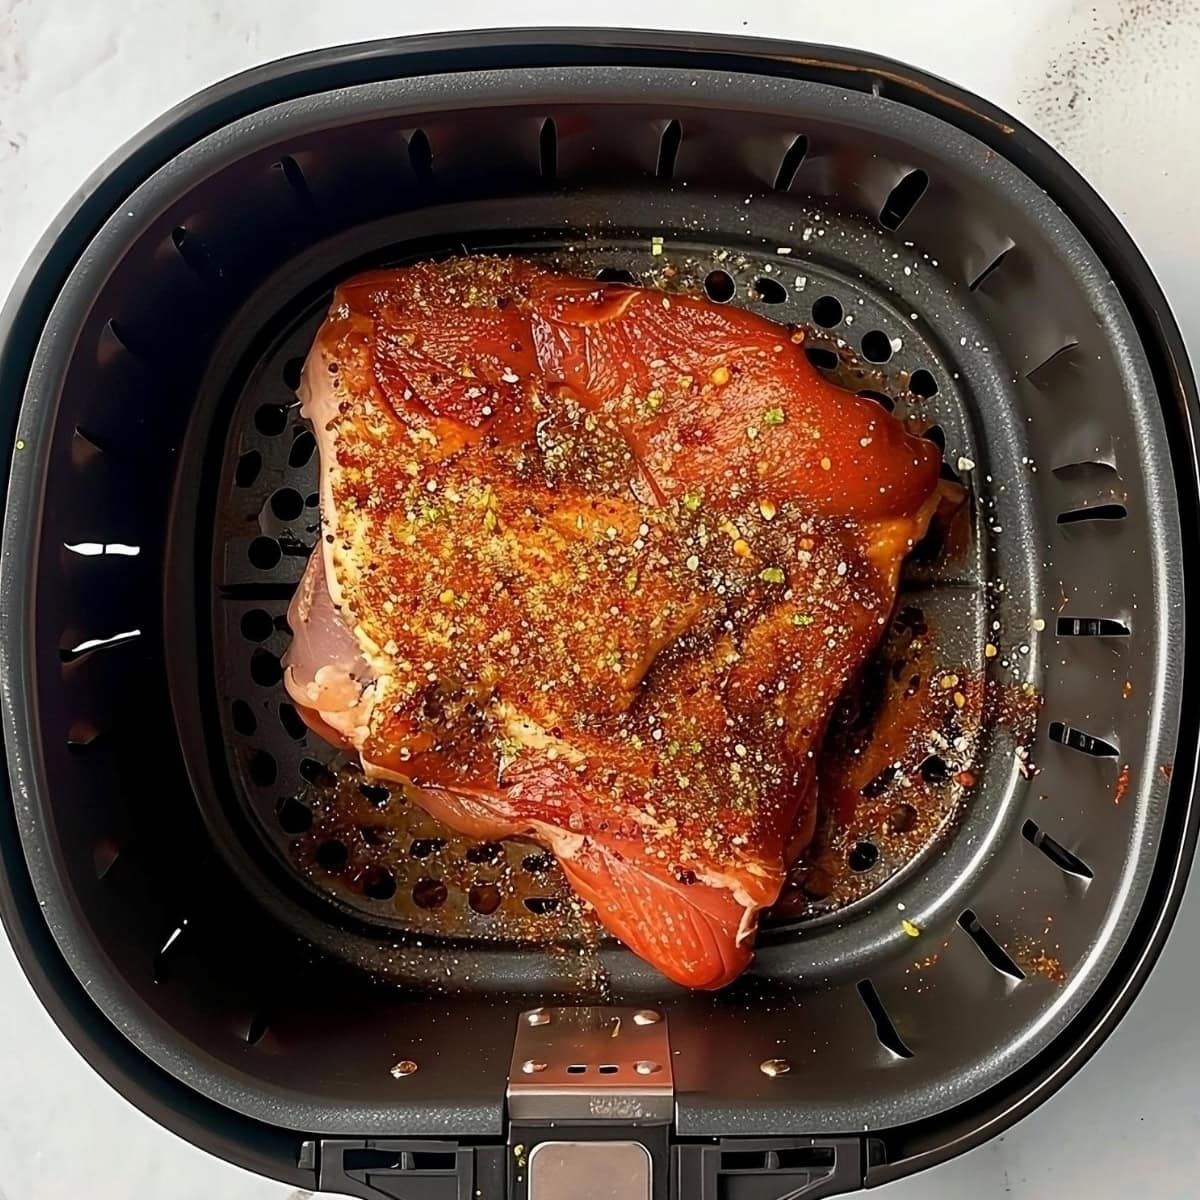 Pork meat seasoned with dry rubs spices placed inside an air fryer basket.